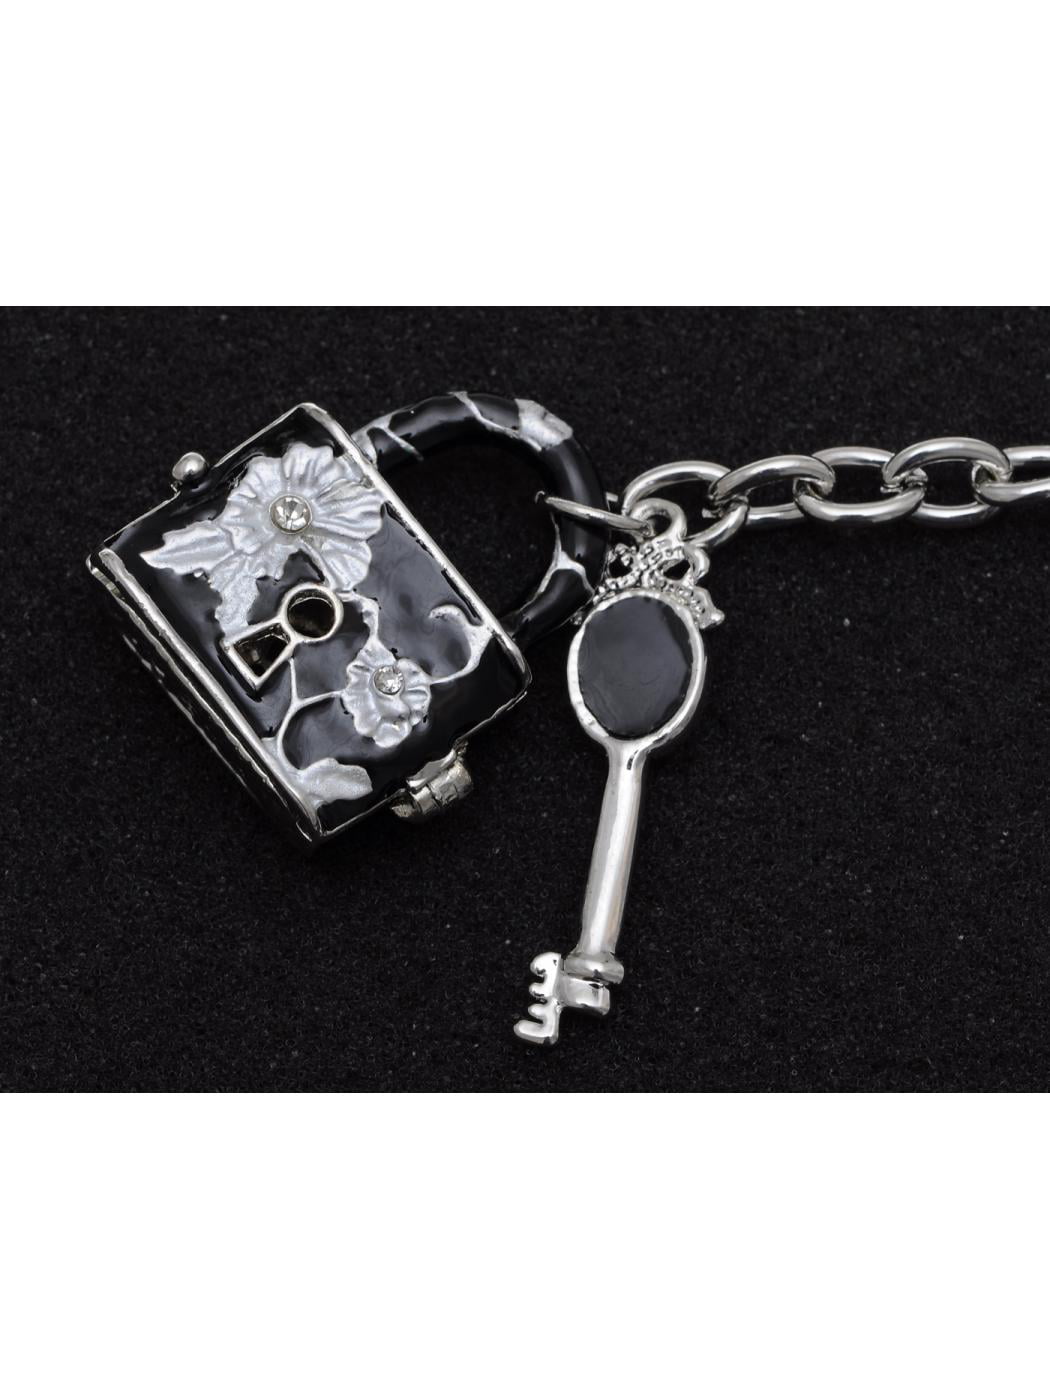 Accessories Keychains & Lanyards Zipper Charms keychain Pocket pendant luxury charm snap button jewelry removable bee 